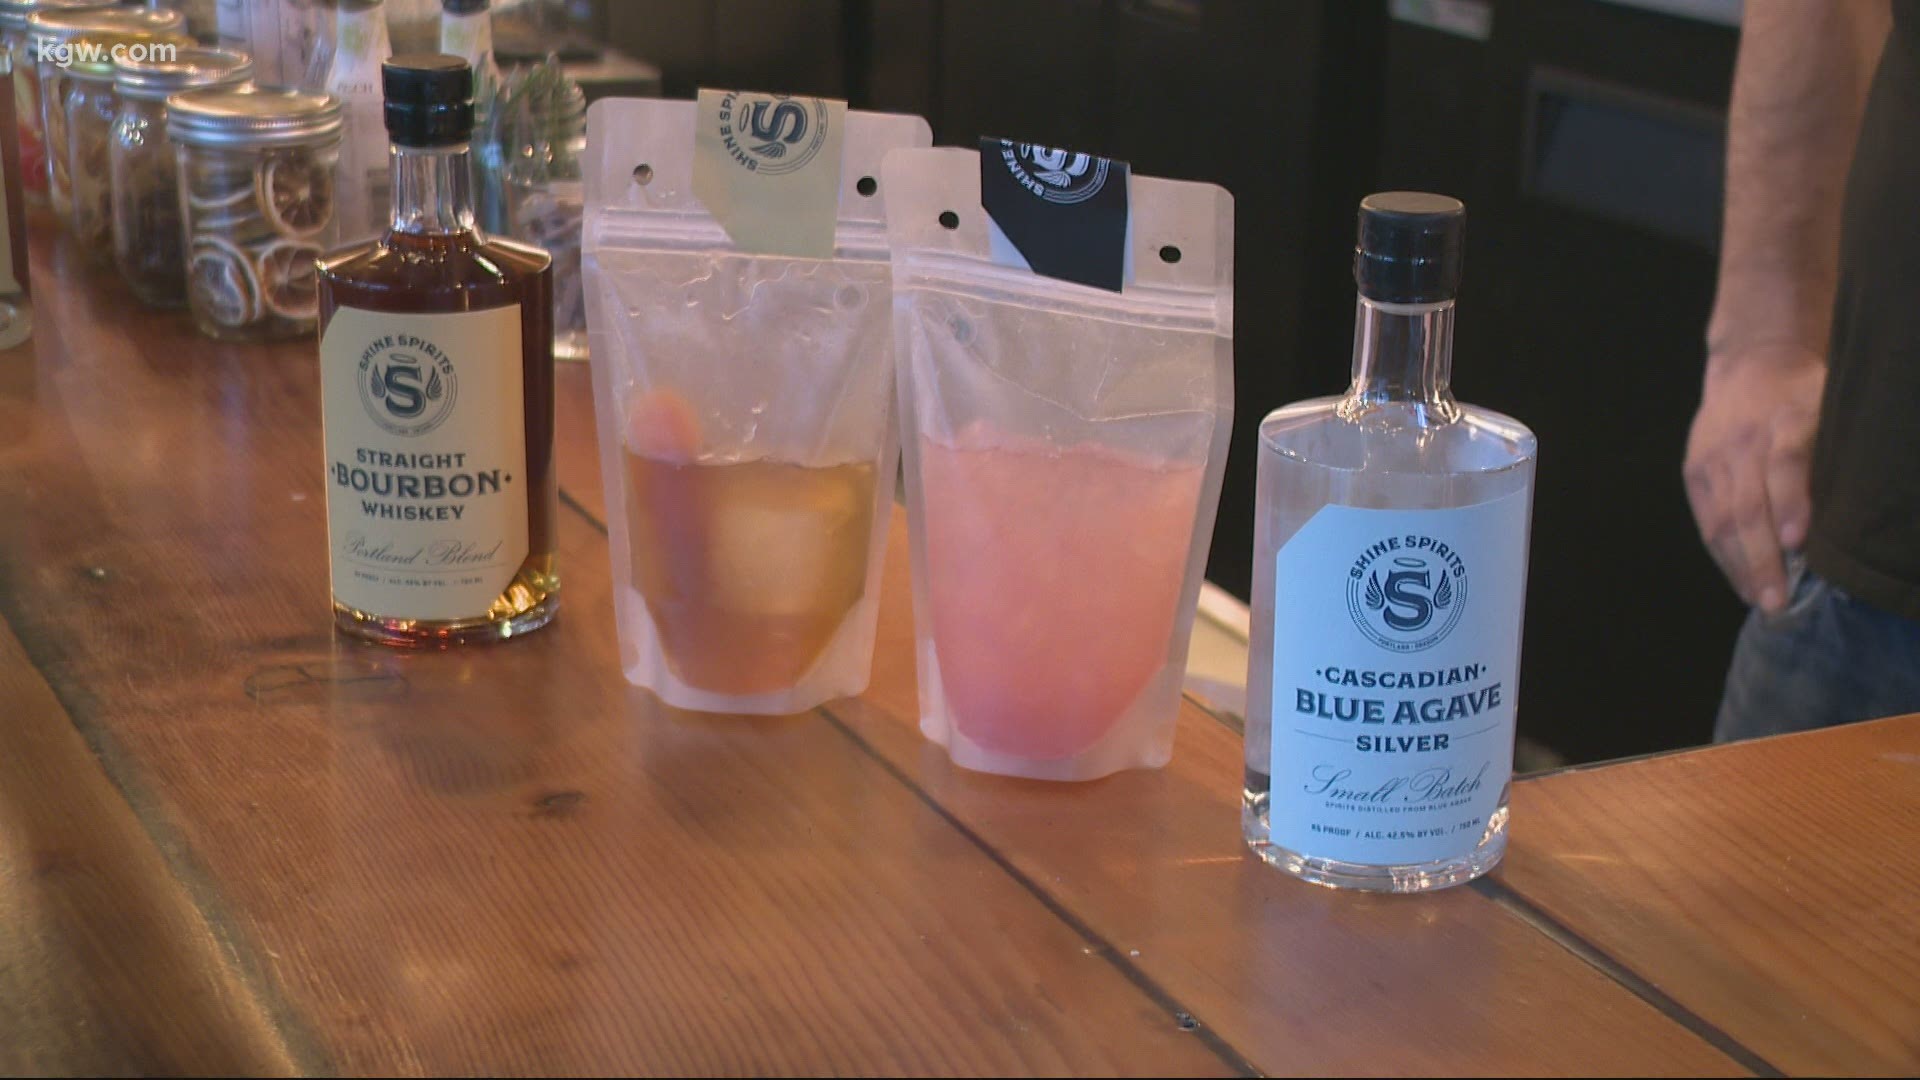 Portland's Shine Distillery is among the businesses looking forward to adding take-out cocktails to their menu.